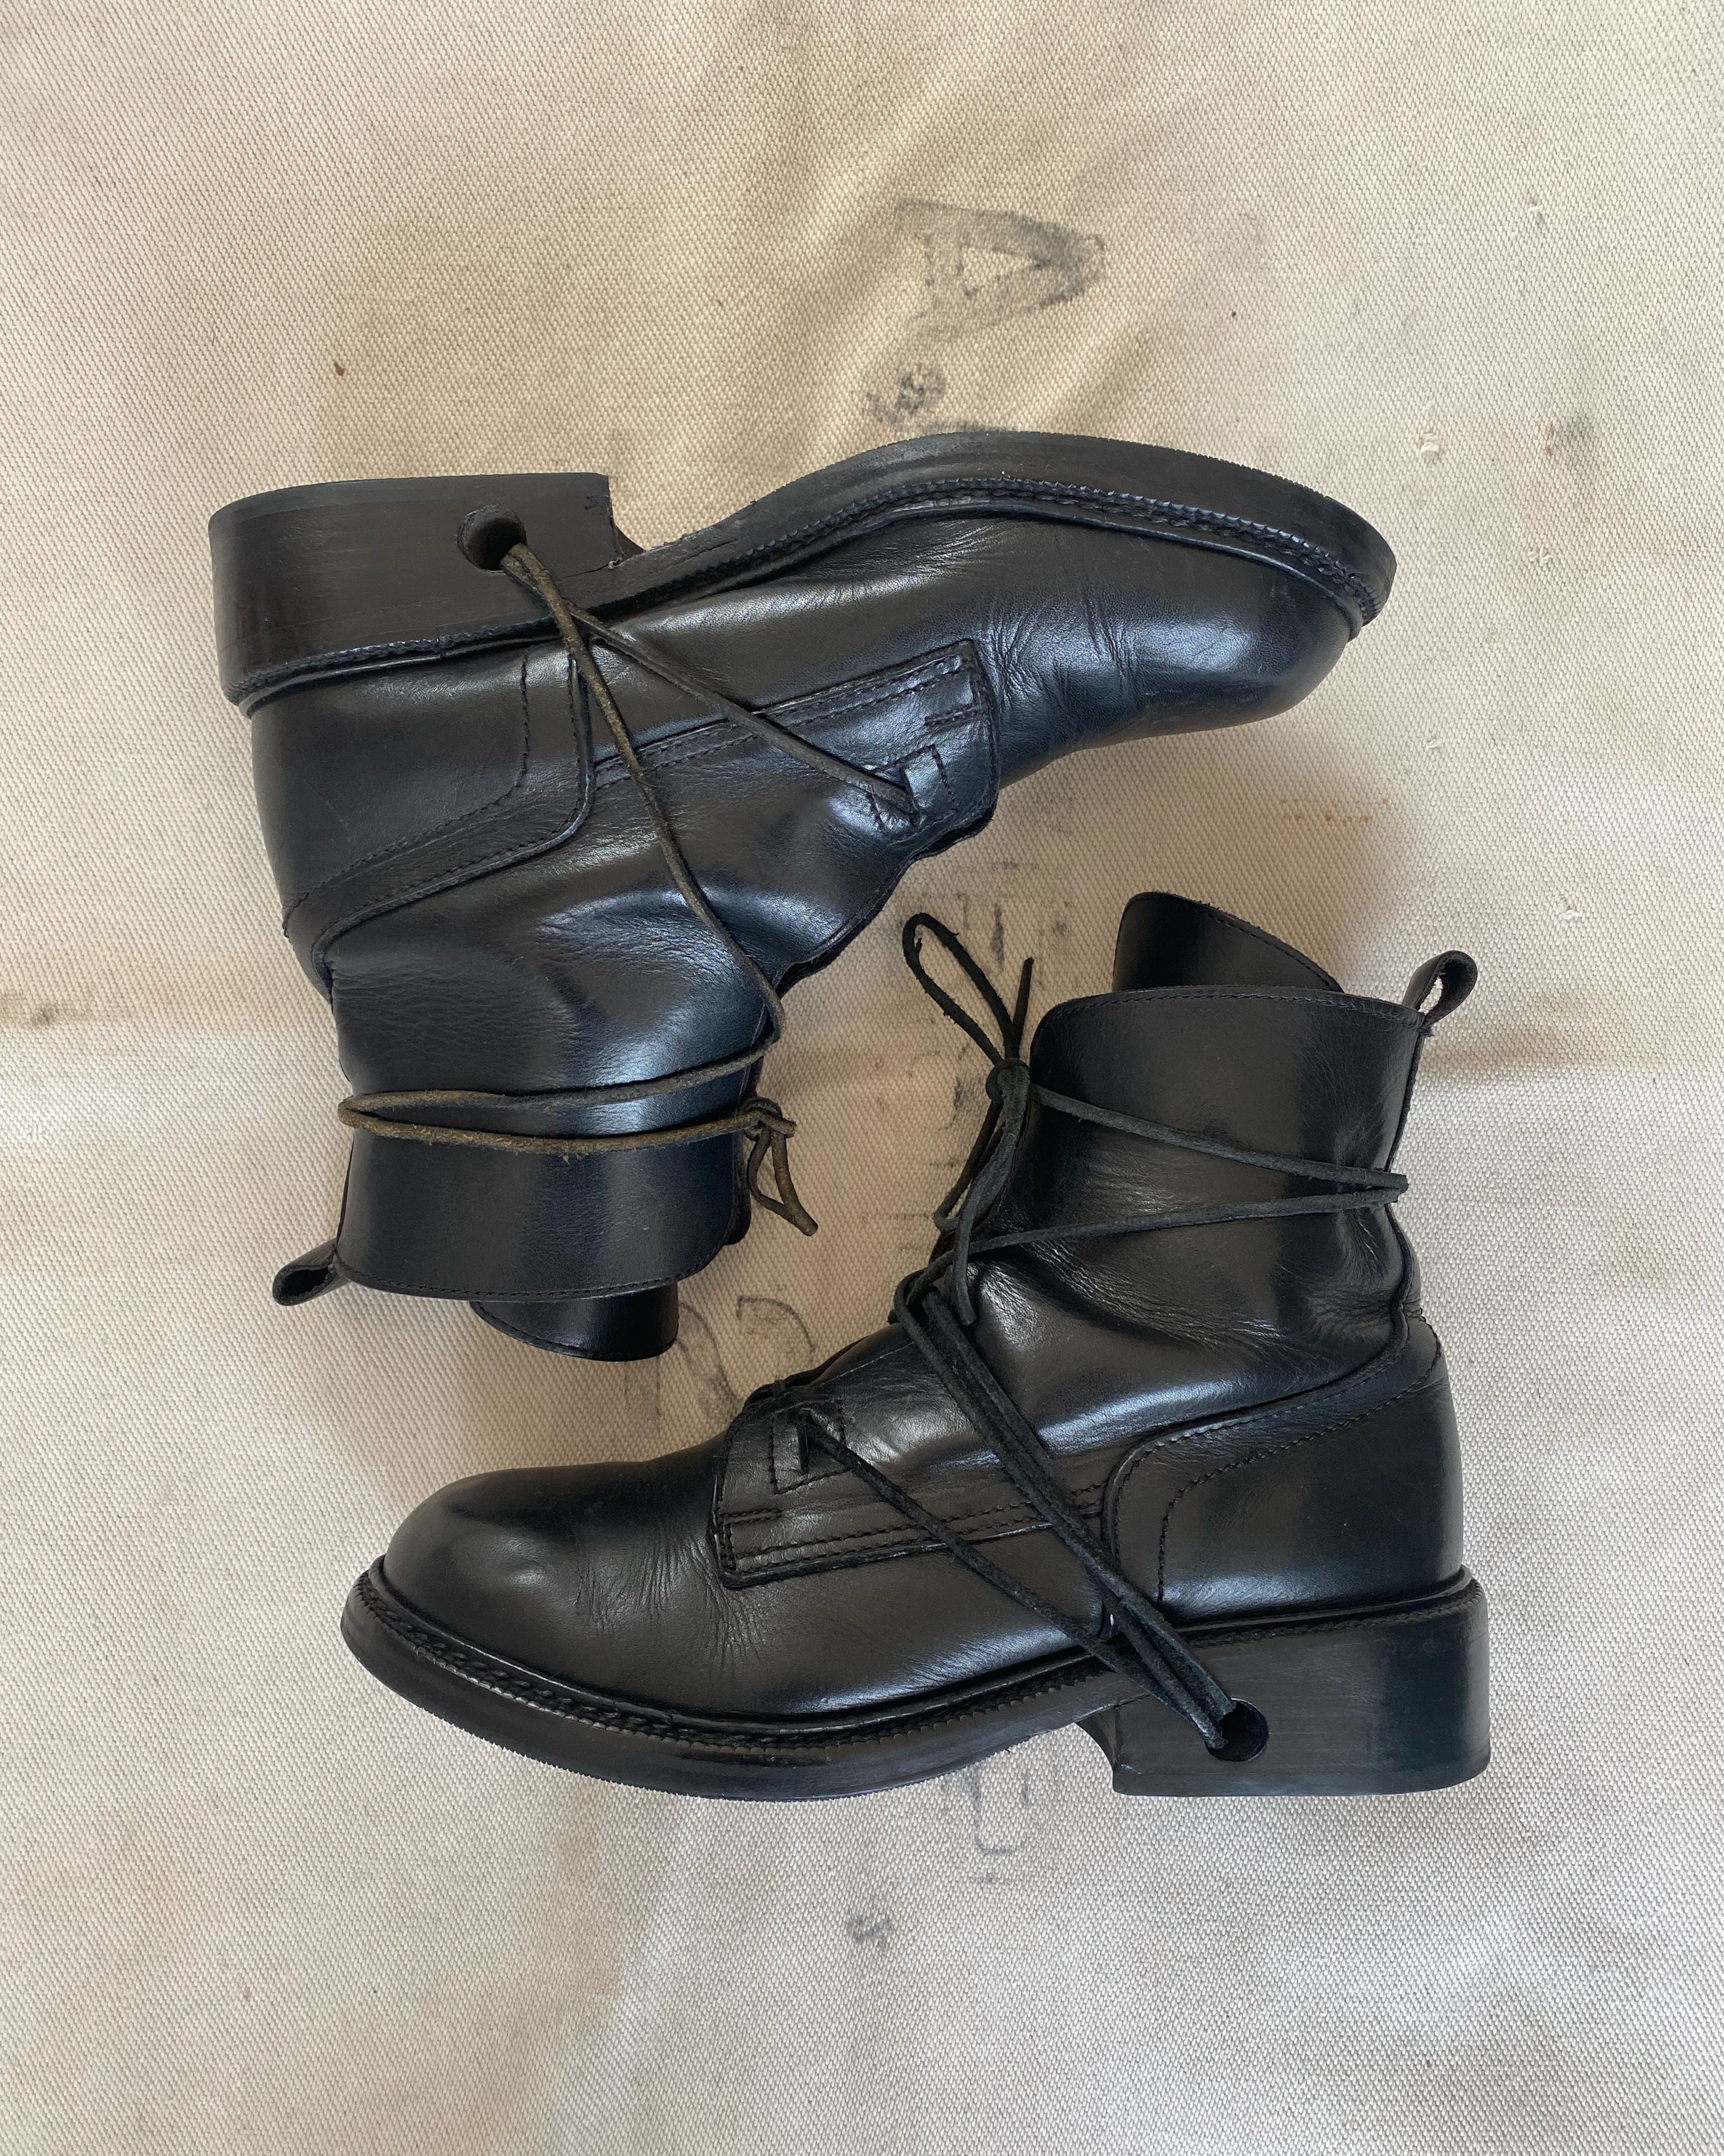 Dirk Bikkembergs 90s Archive Boots - 5